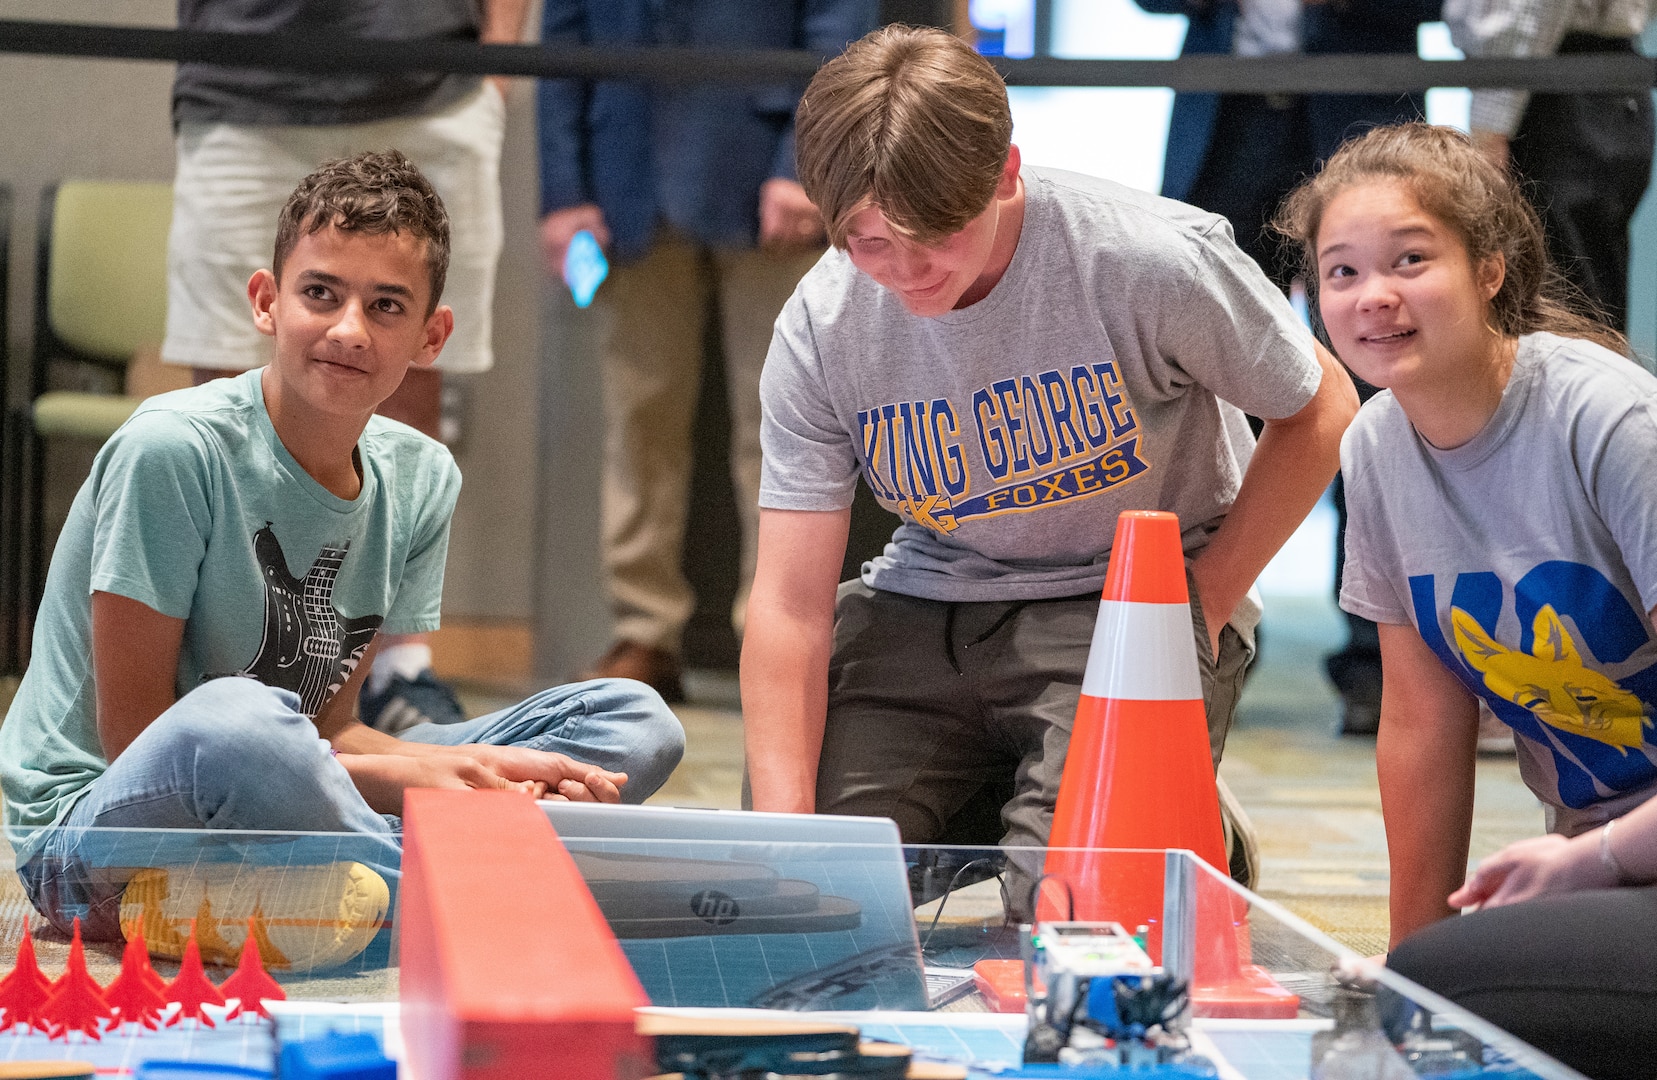 IMAGE: Members of the King George High School robotics team eye the clock as their time runs out during the Innovation Challenge @Dahlgren. The Foxes fielded three separate teams during the event that took place April 29-30 at the University of Mary Washington Dahlgren Campus.